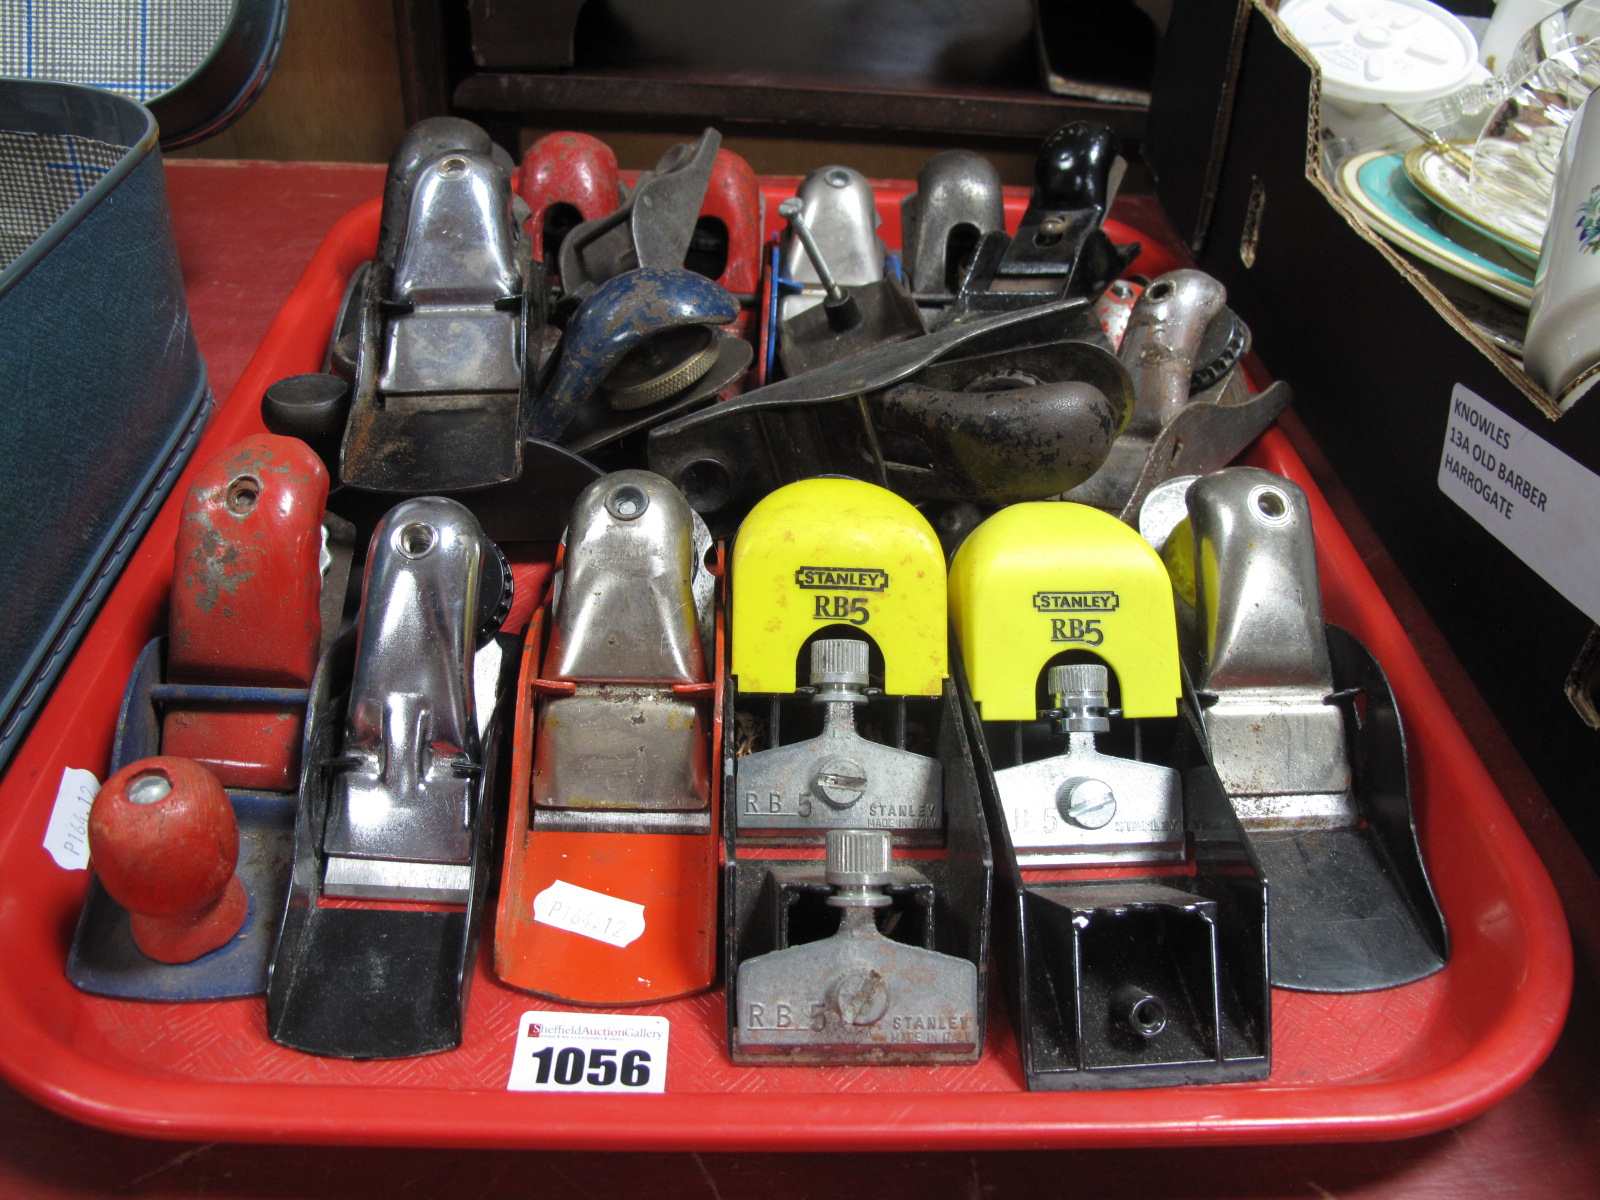 A Collection of Hand Planes, varying makers including Stanley, Rapier, Anant etc:- One Tray